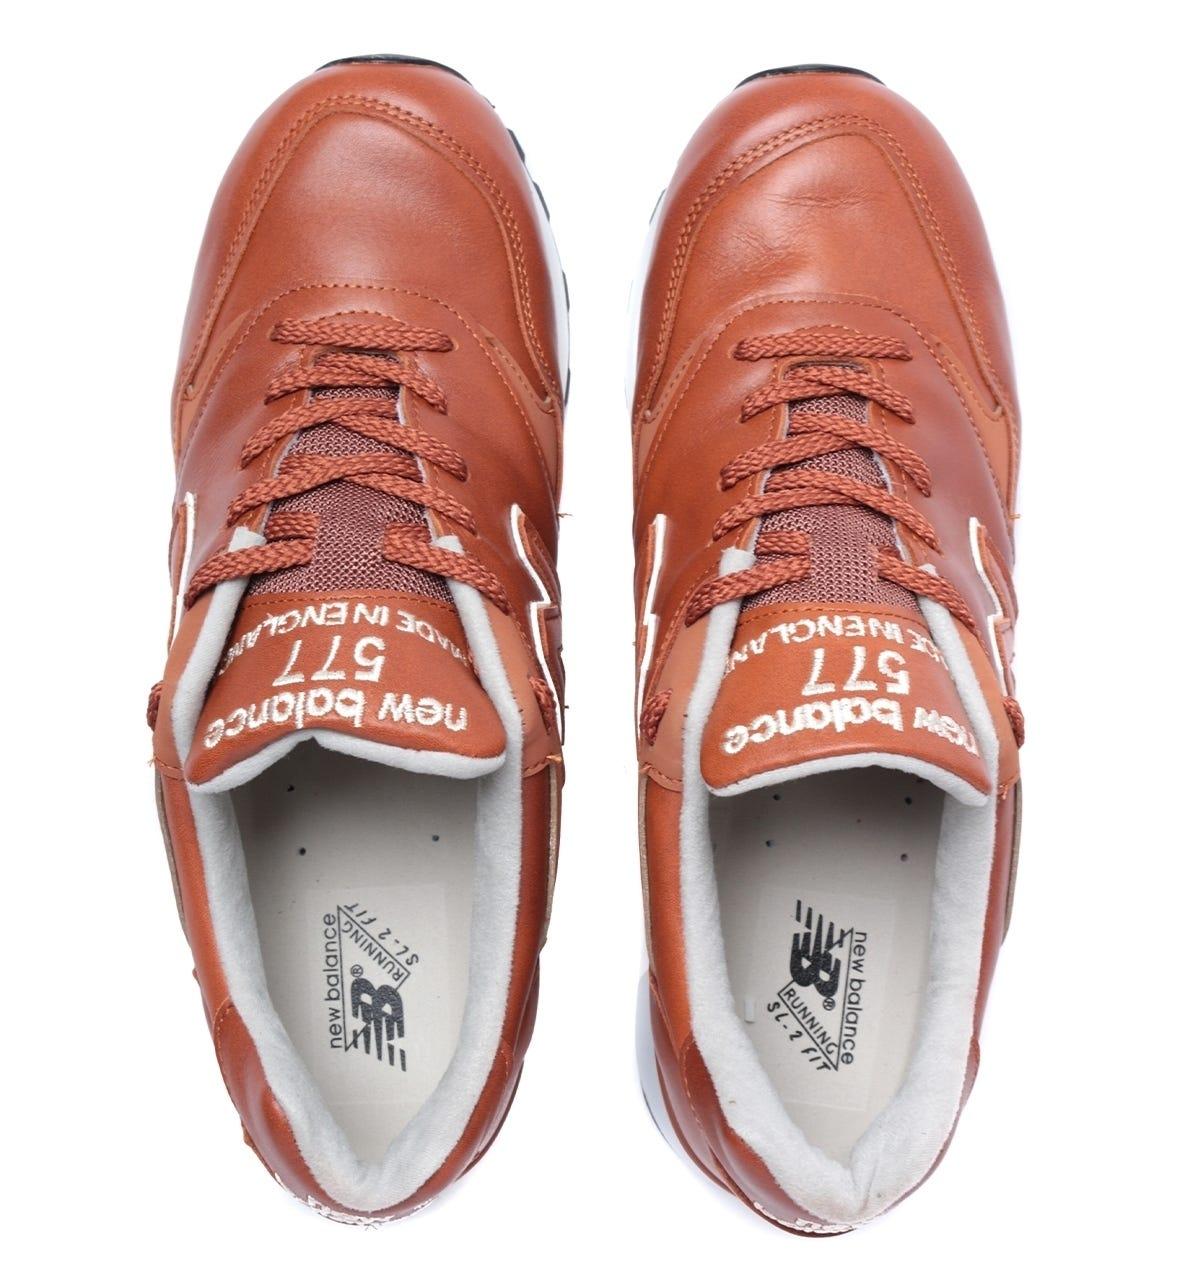 new balance men's leather sneakers